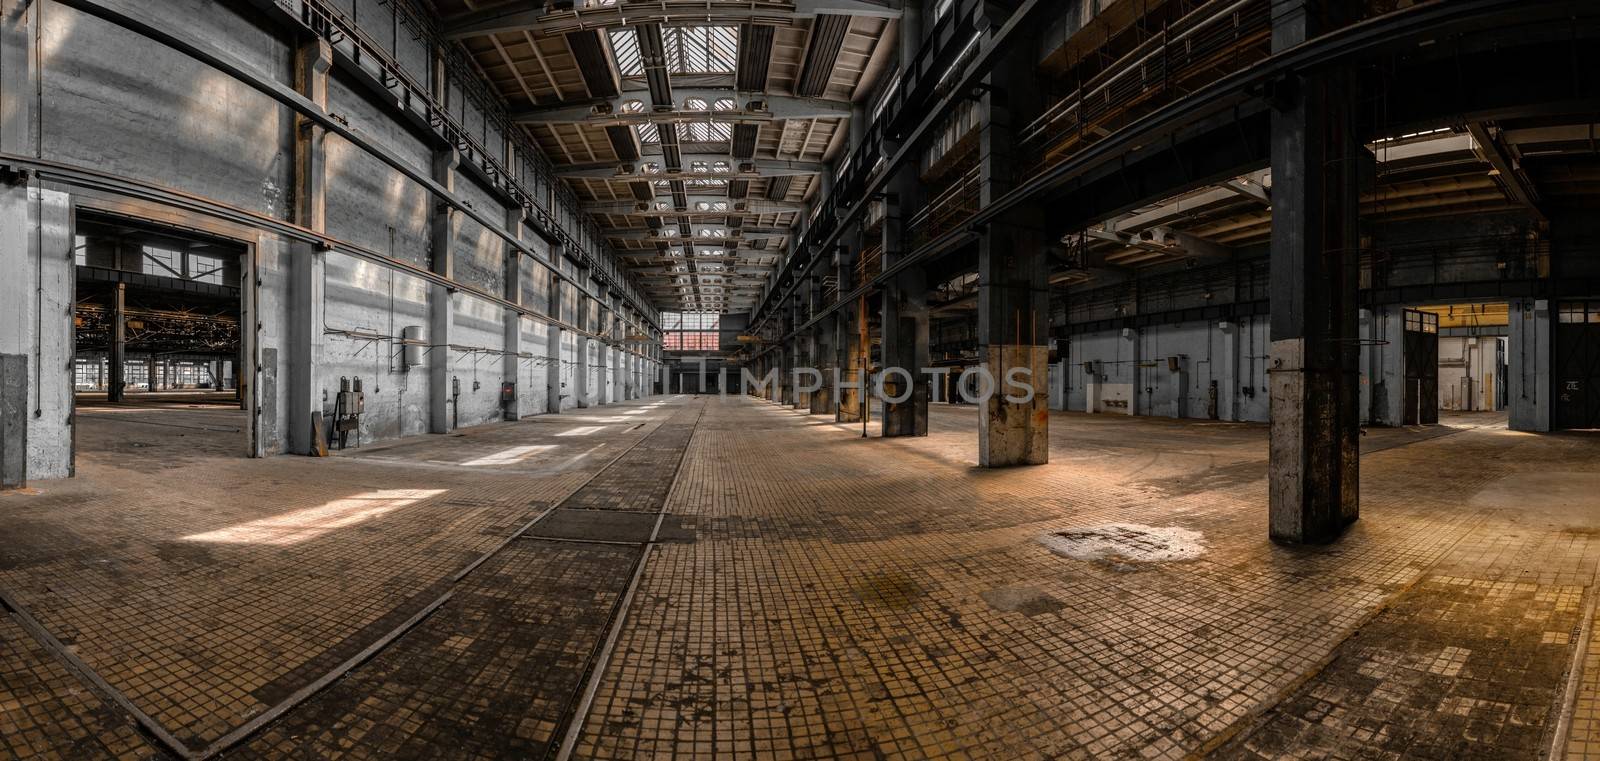 Industrial interior of a large abandoned building